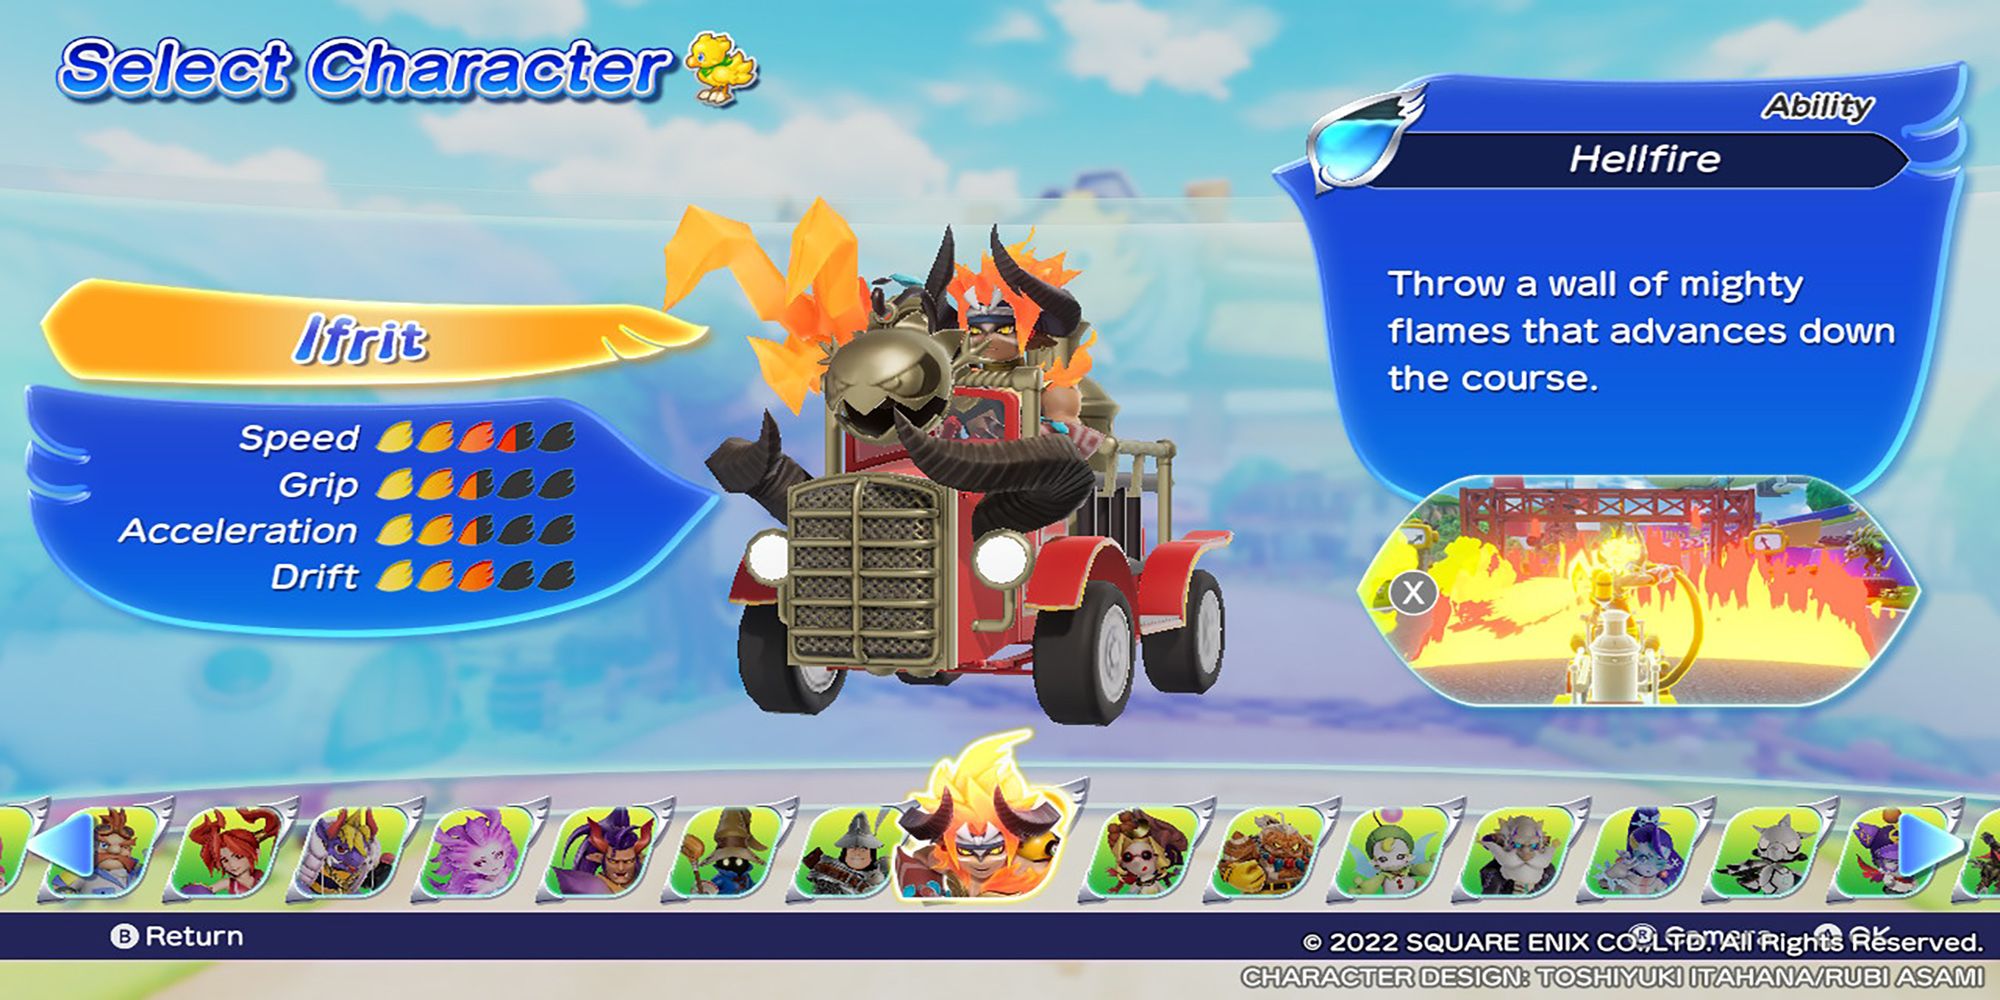 Ifrit's character model, along with his stats and abilities, in the Select Character menu. Chocobo GP.